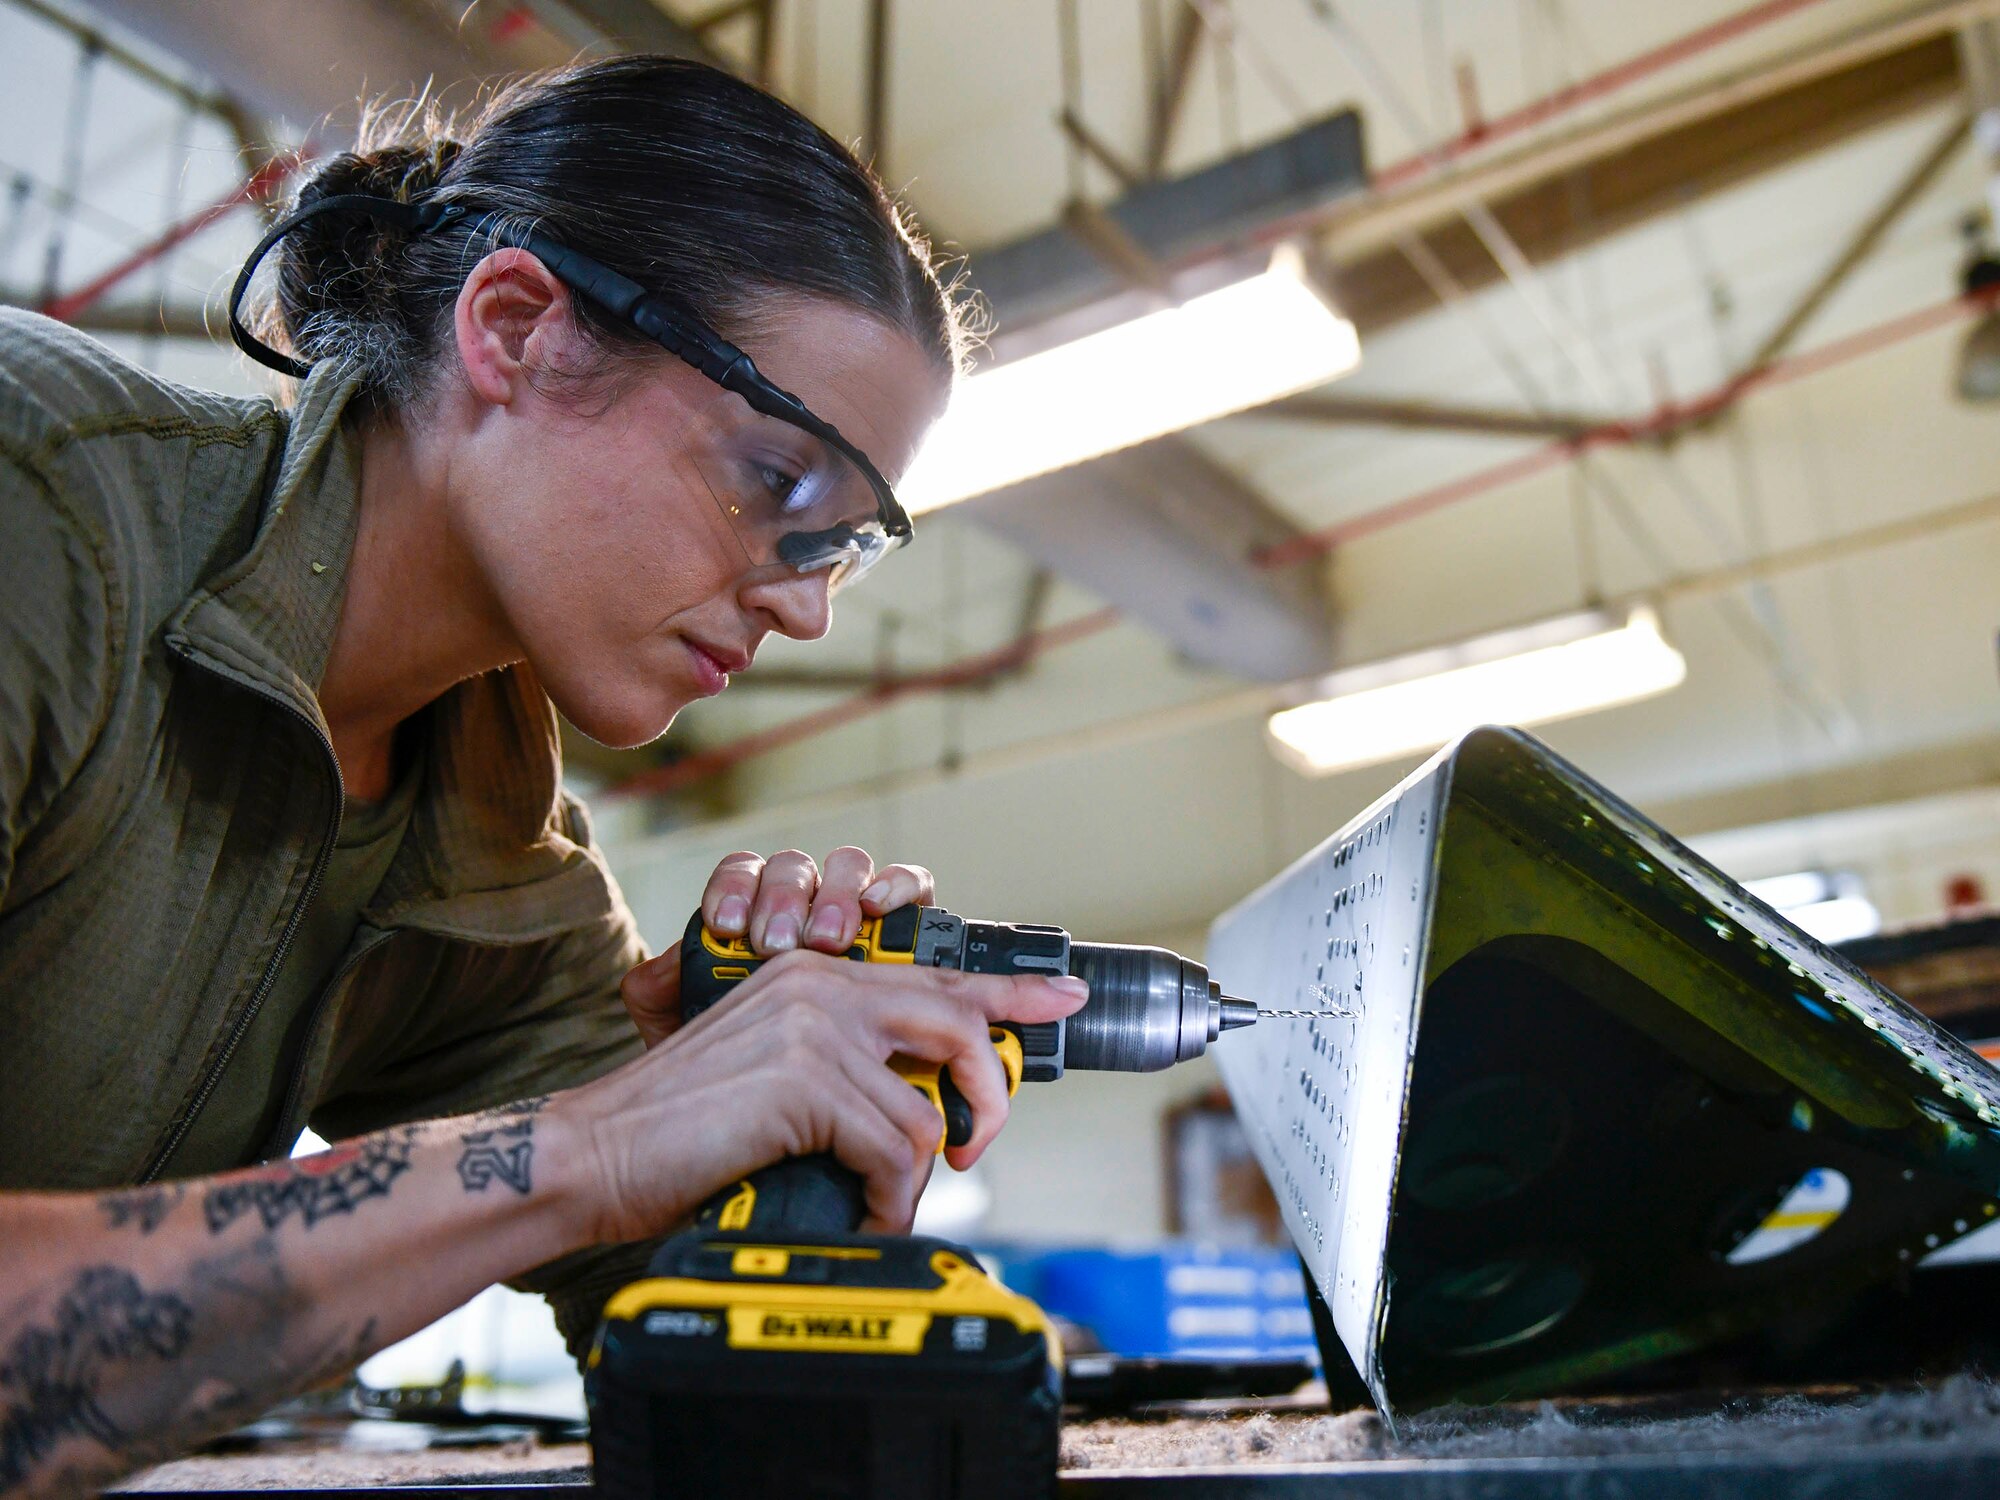 U.S. Air Force Senior Airman Anne Tinsley, 18th Equipment Maintenance Squadron aircraft structural maintenance journeyman from Mount Sinai, New York was selected as the 18th Wing’s Airman of the Week at Kadena Air Base, Japan. The Airman of the Week program is an opportunity for outstanding Airmen to be recognized by KAB leadership as well as showcase these young leaders to their peers. (U.S. Air Force photo by Naoto Anazawa)